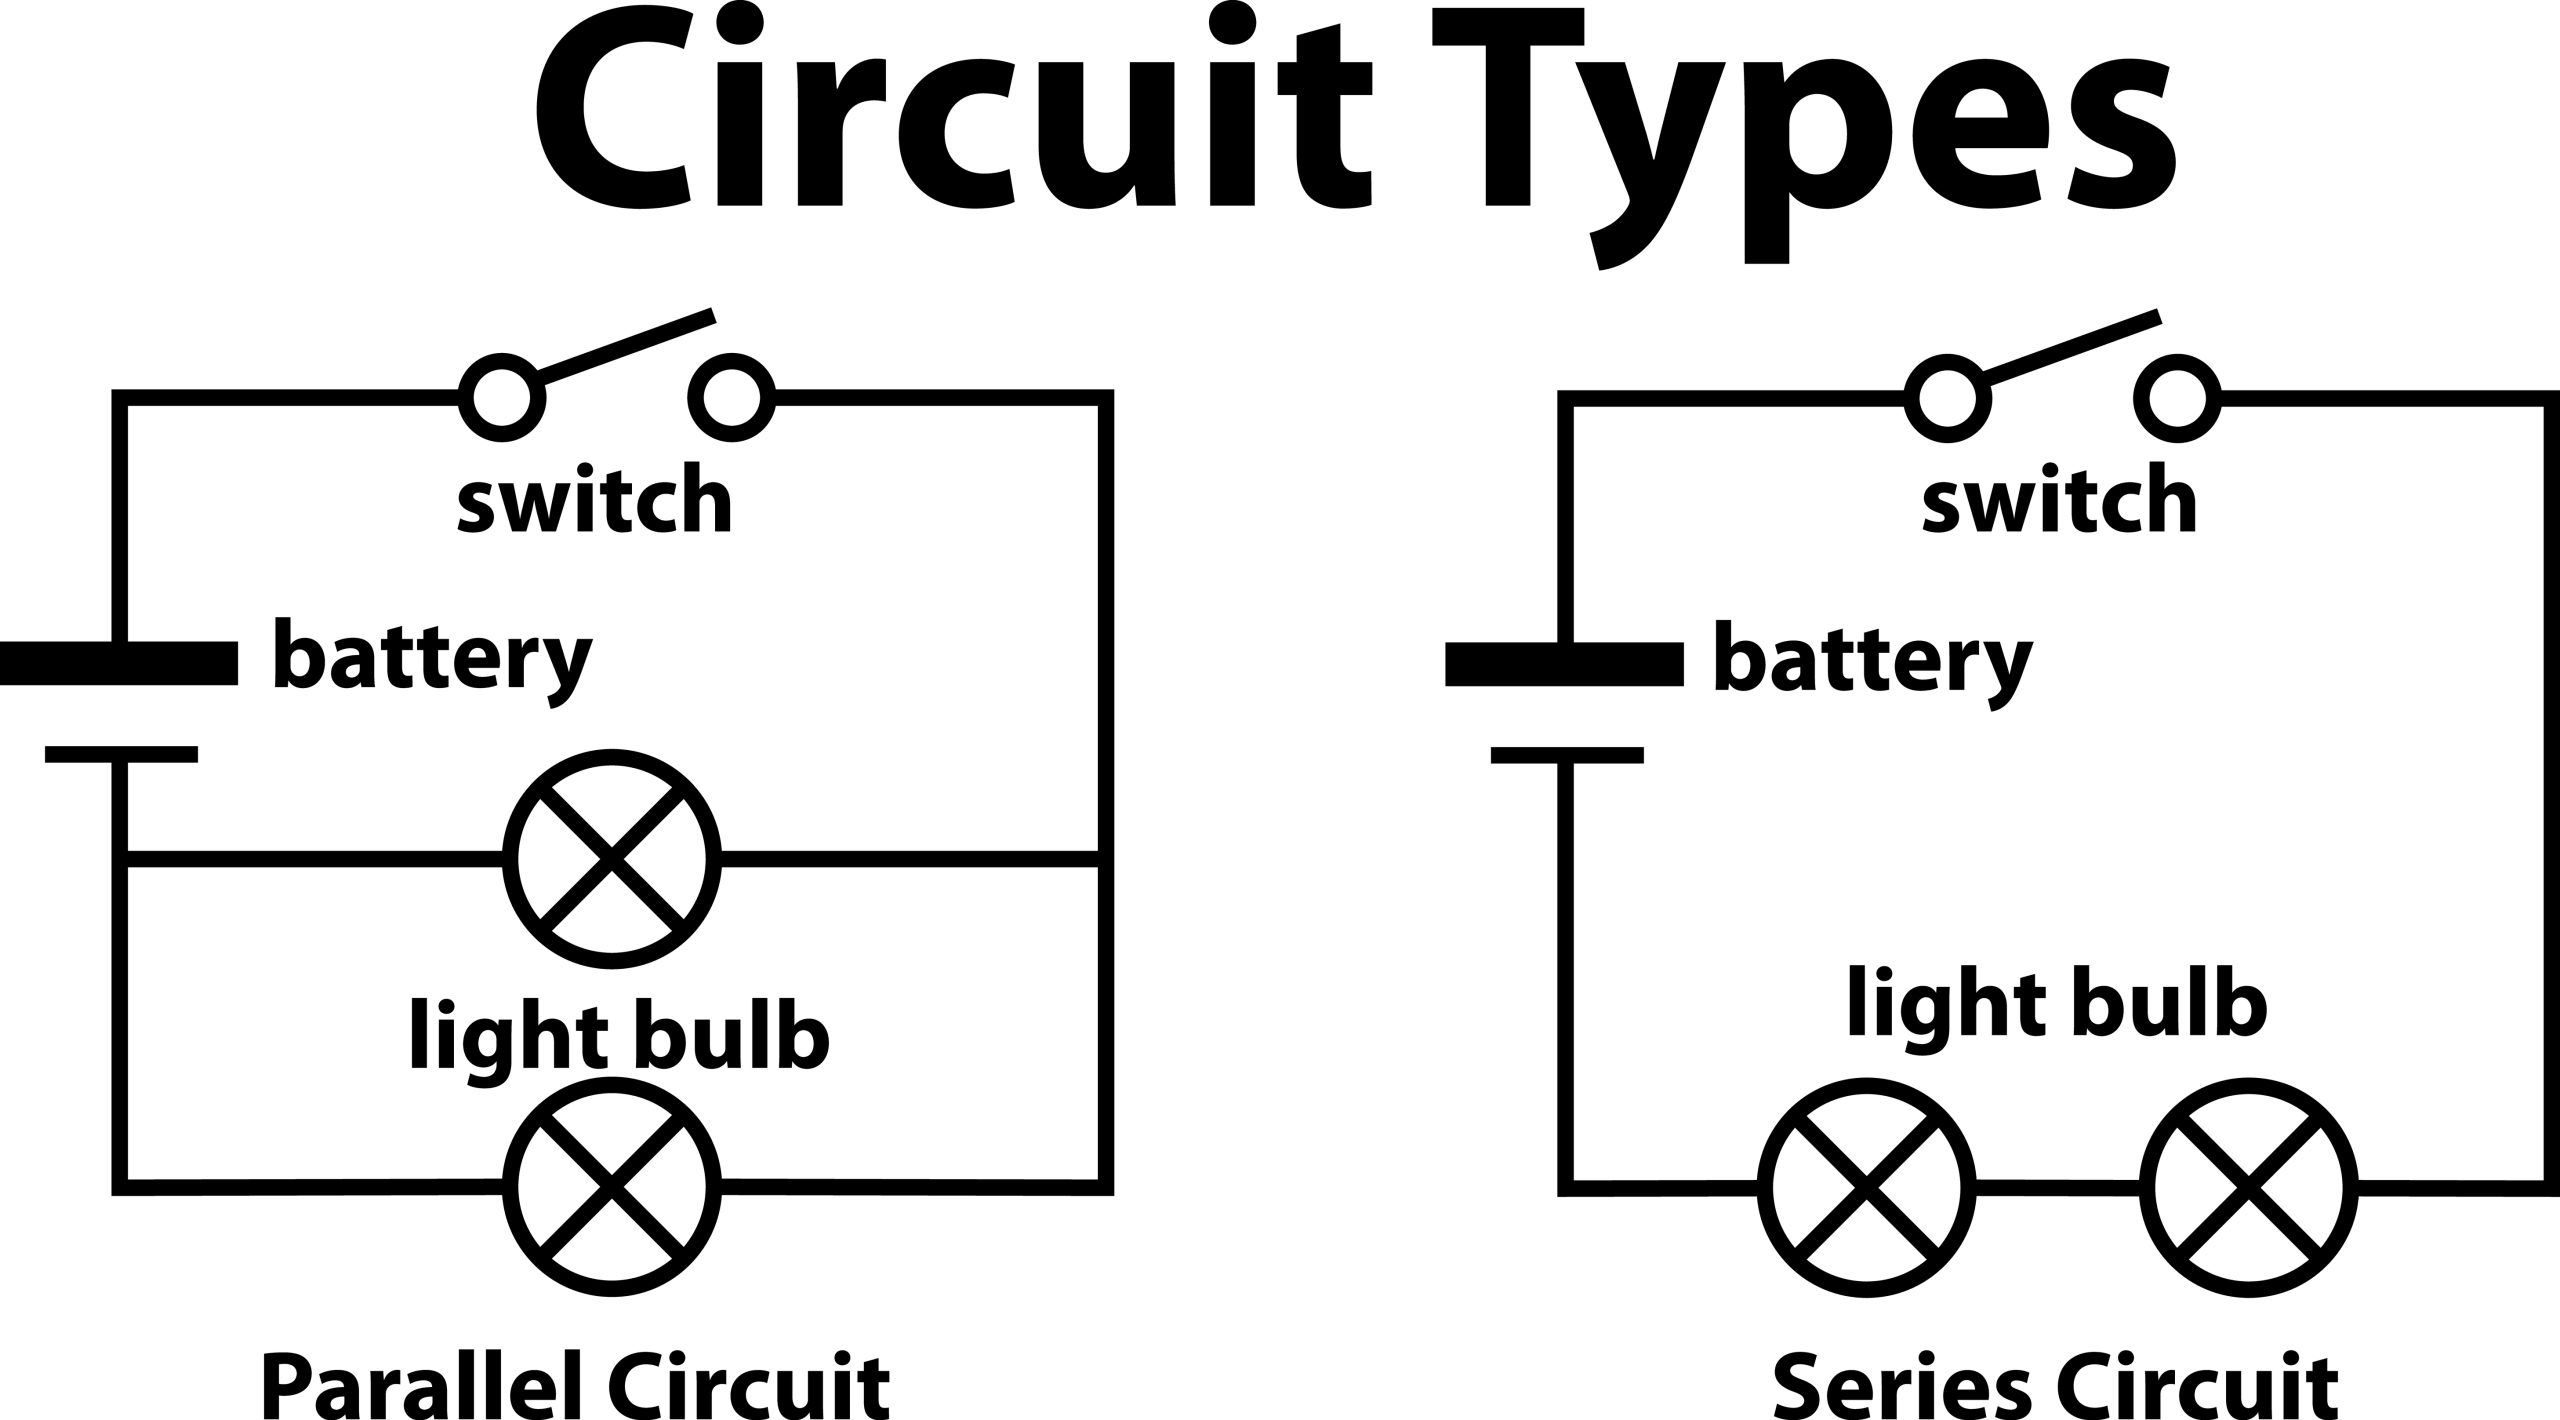 Differences between a parallel and series circuit.